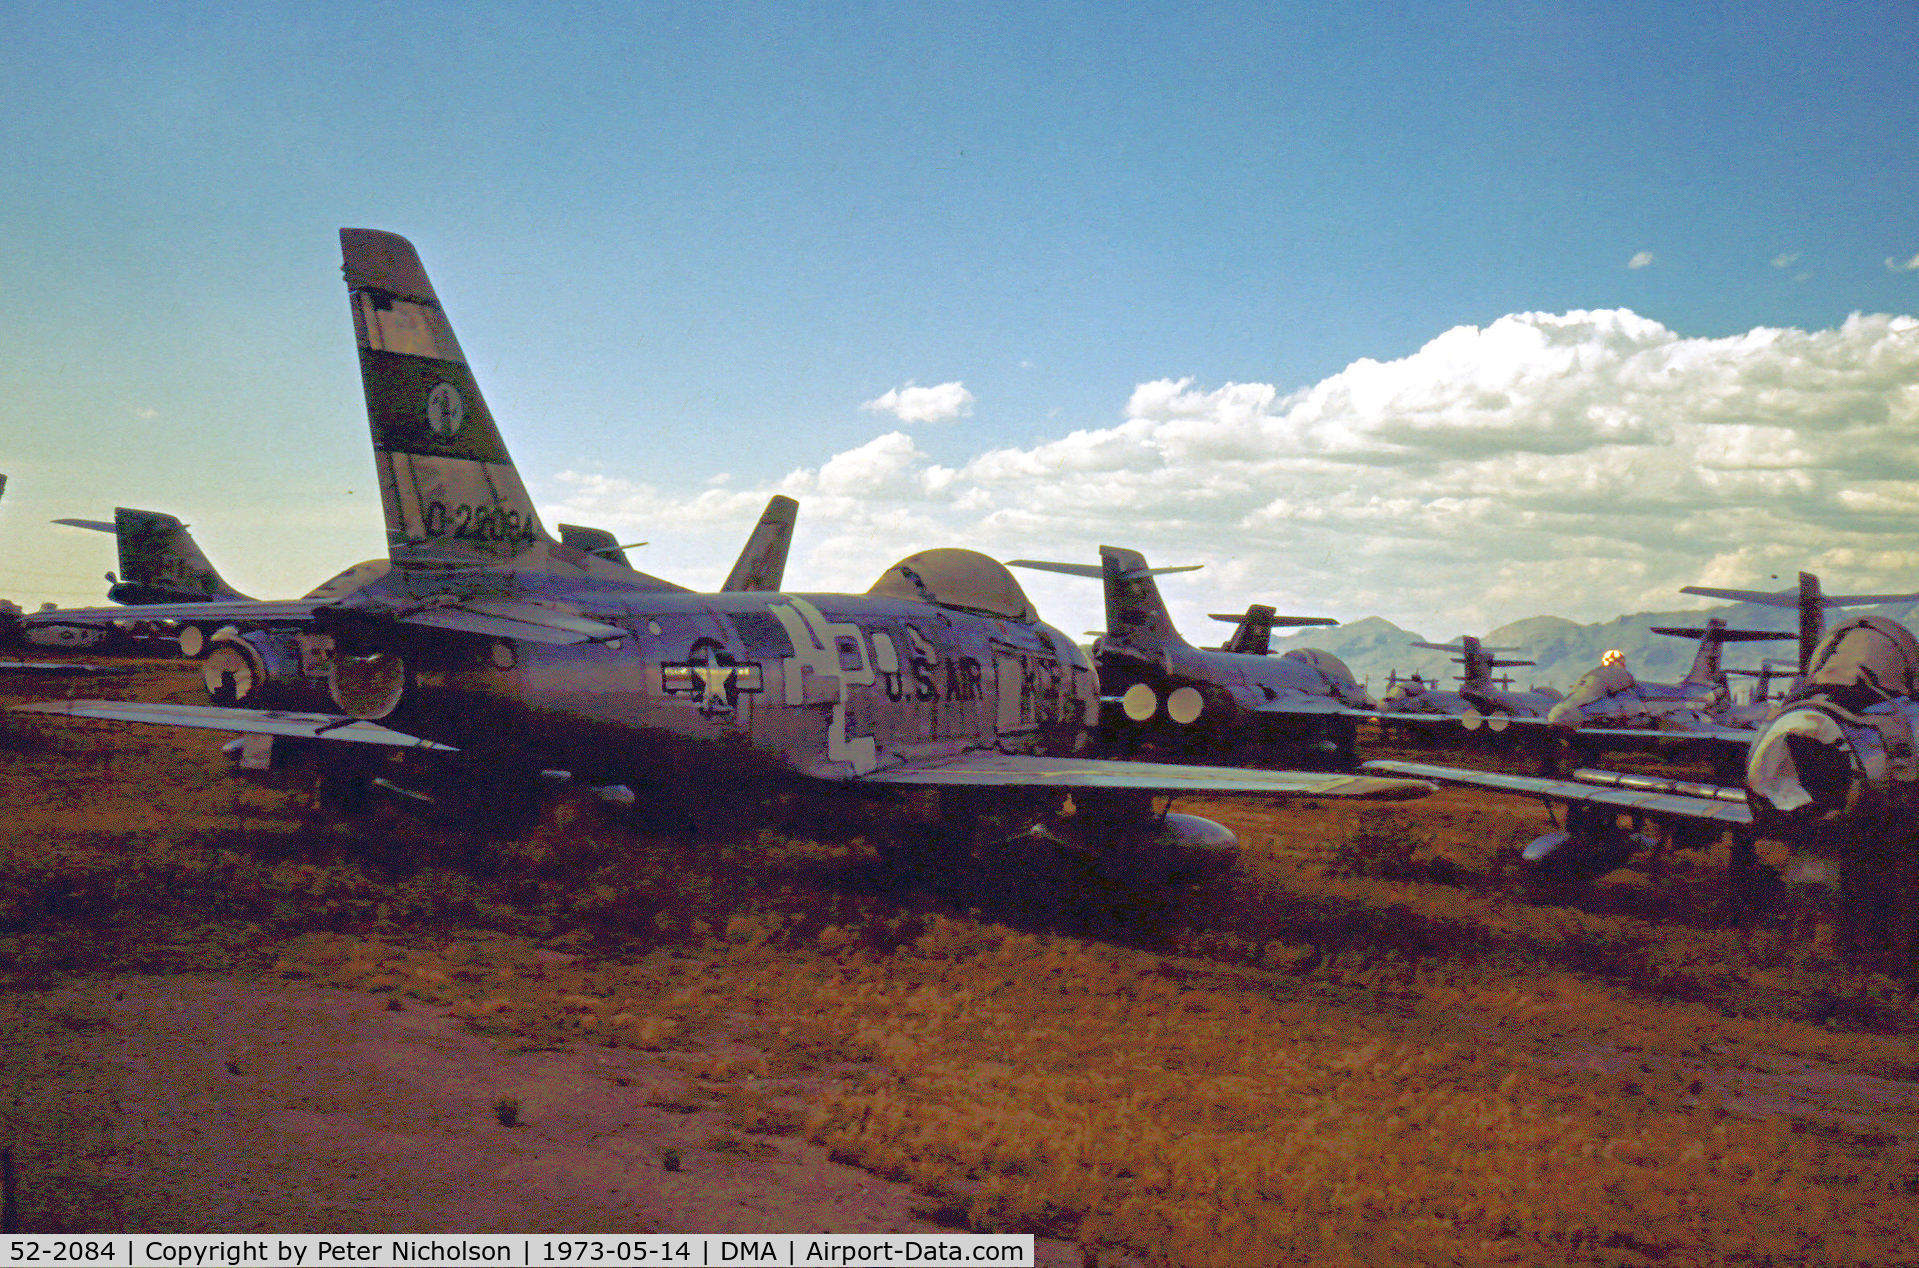 52-2084, 1952 North American F-86H Sabre C/N 187-110, F-86H Sabre of 196th Fighter Interceptor Squadron California ANG in storage at what was then known as the Military Aircraft Storage & Disposition - MASDC - in May 1973.